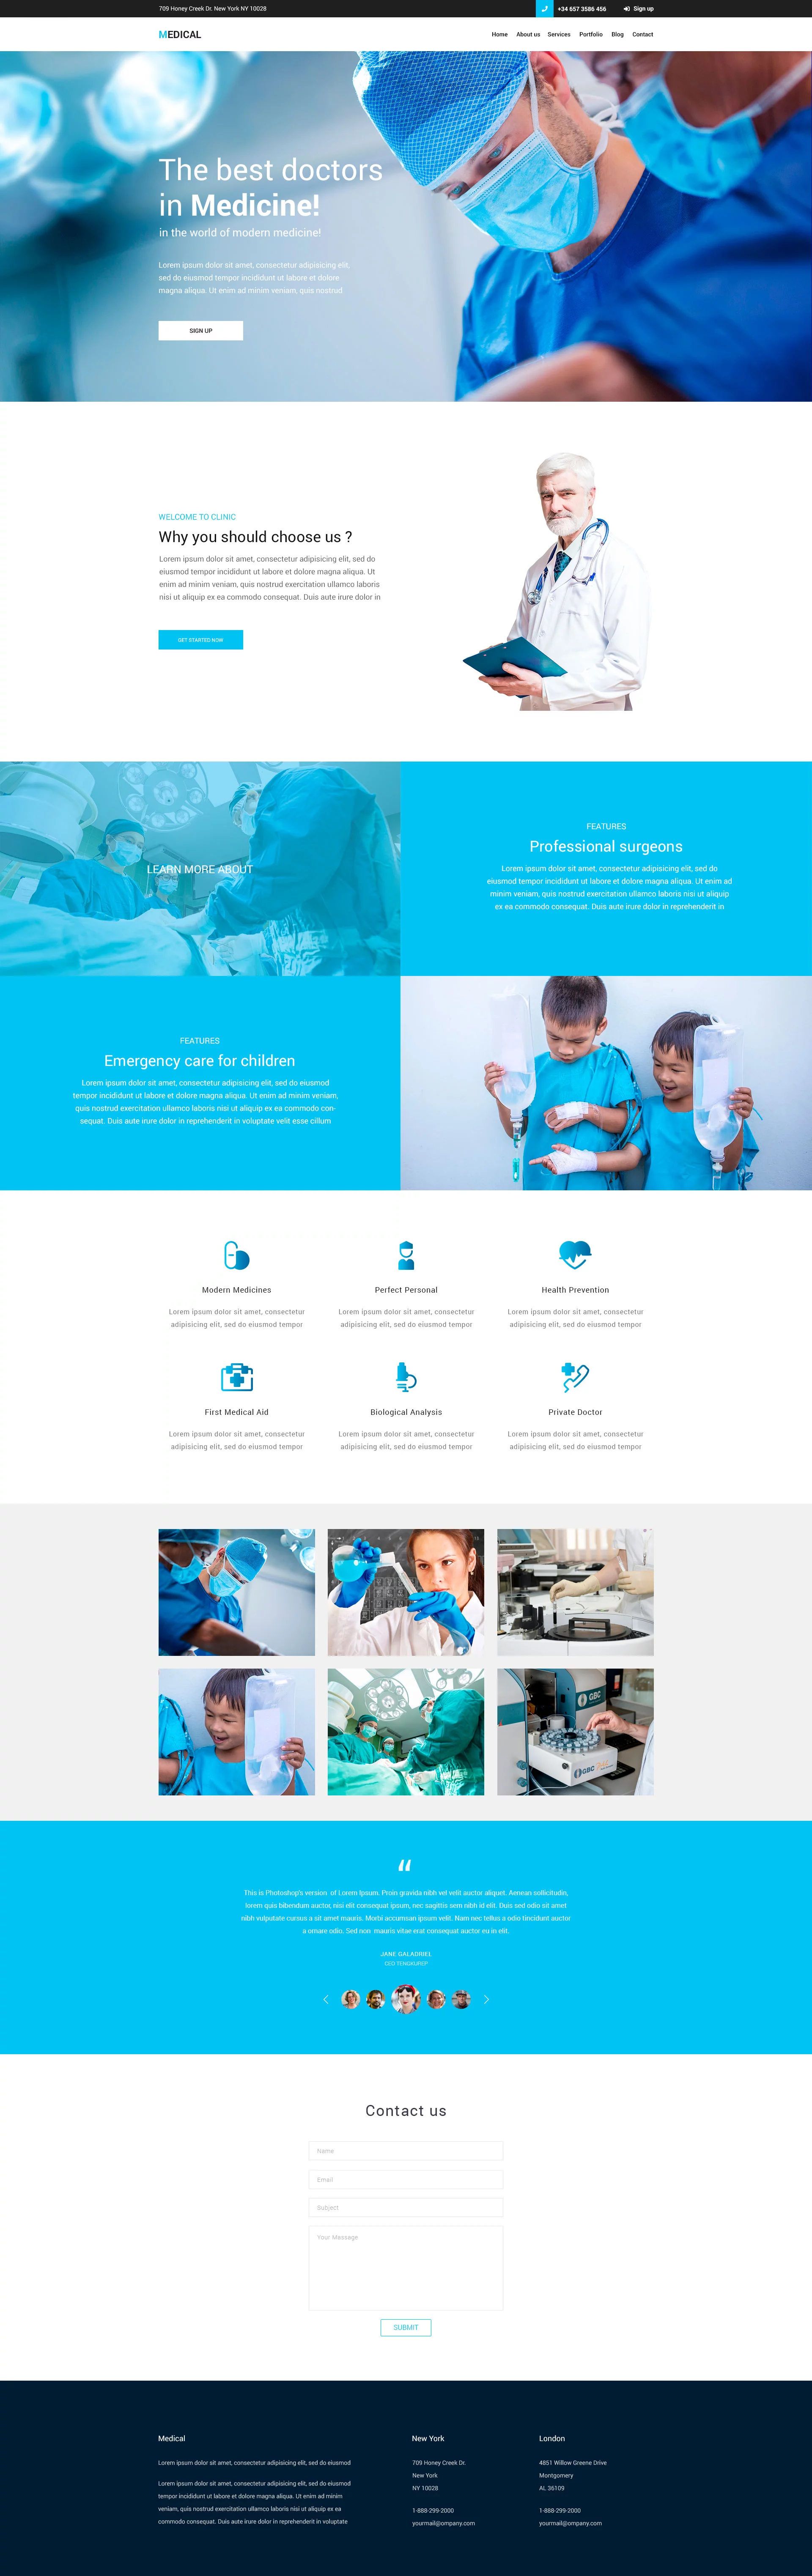 FREE PSD TEMPLATE LANDING PAGE